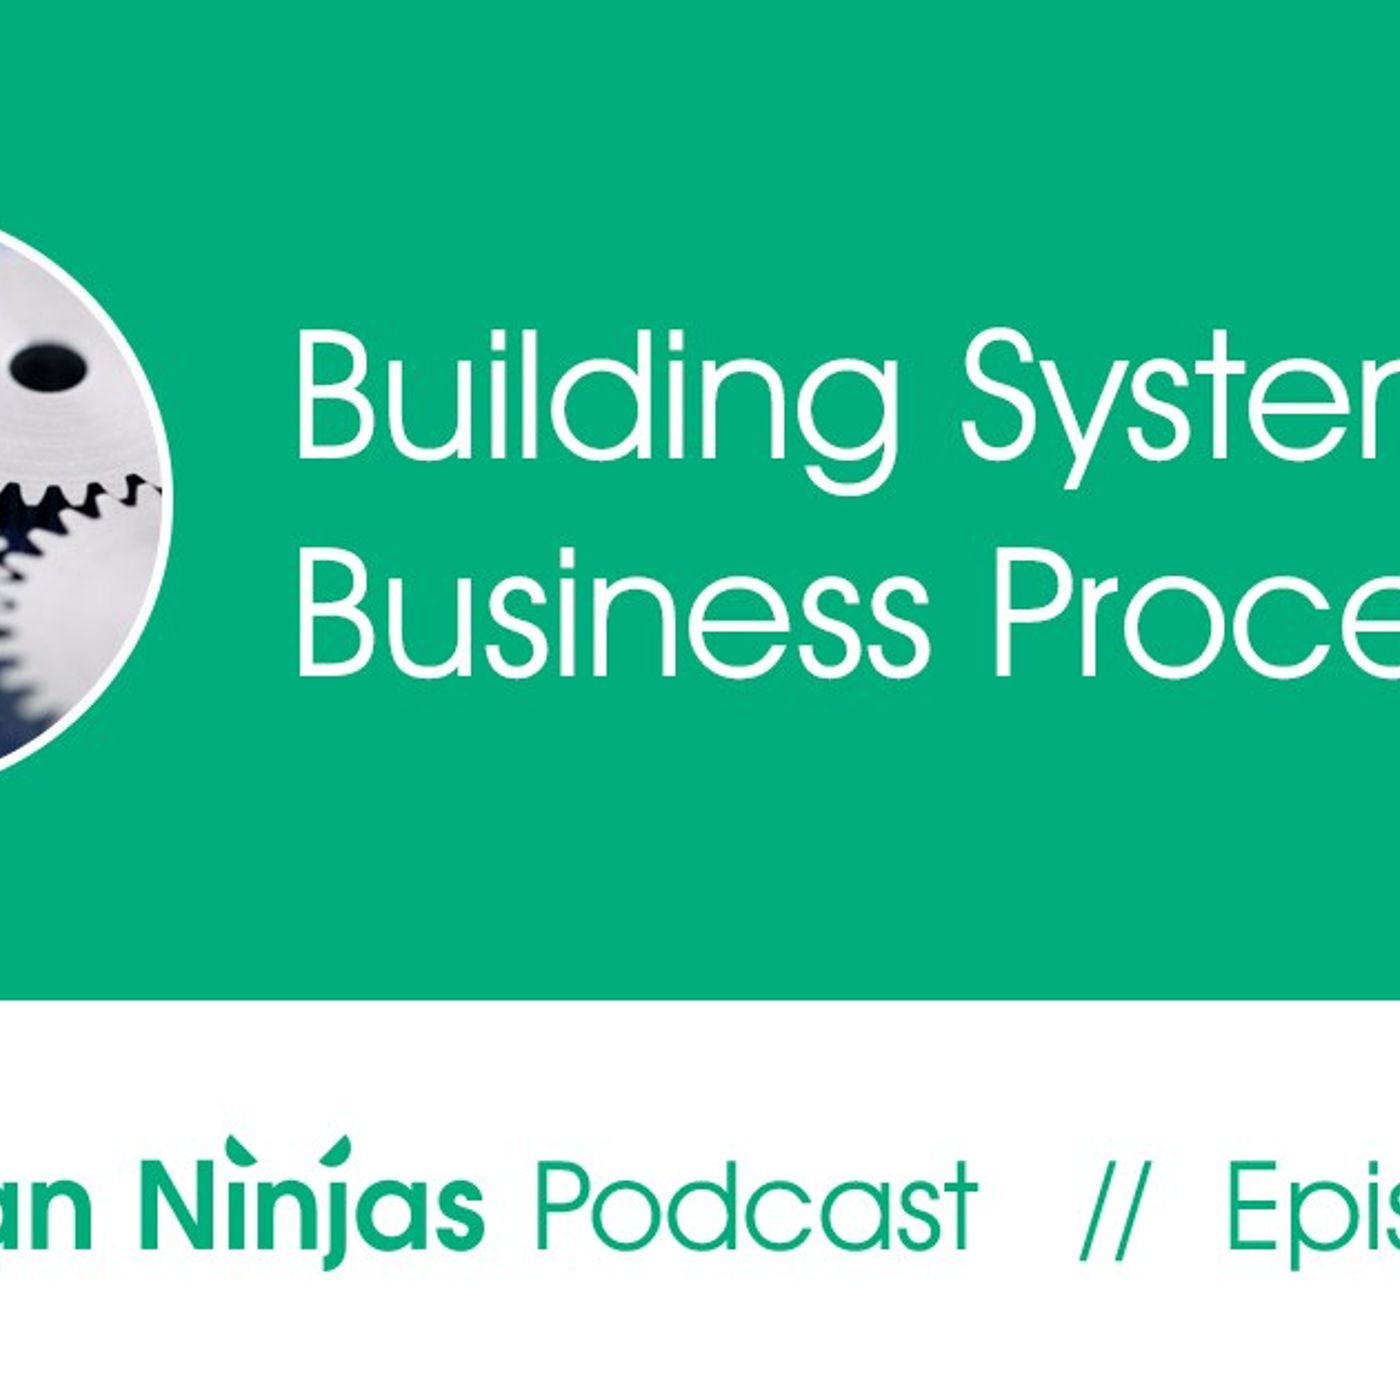 Building systems and processes for small business